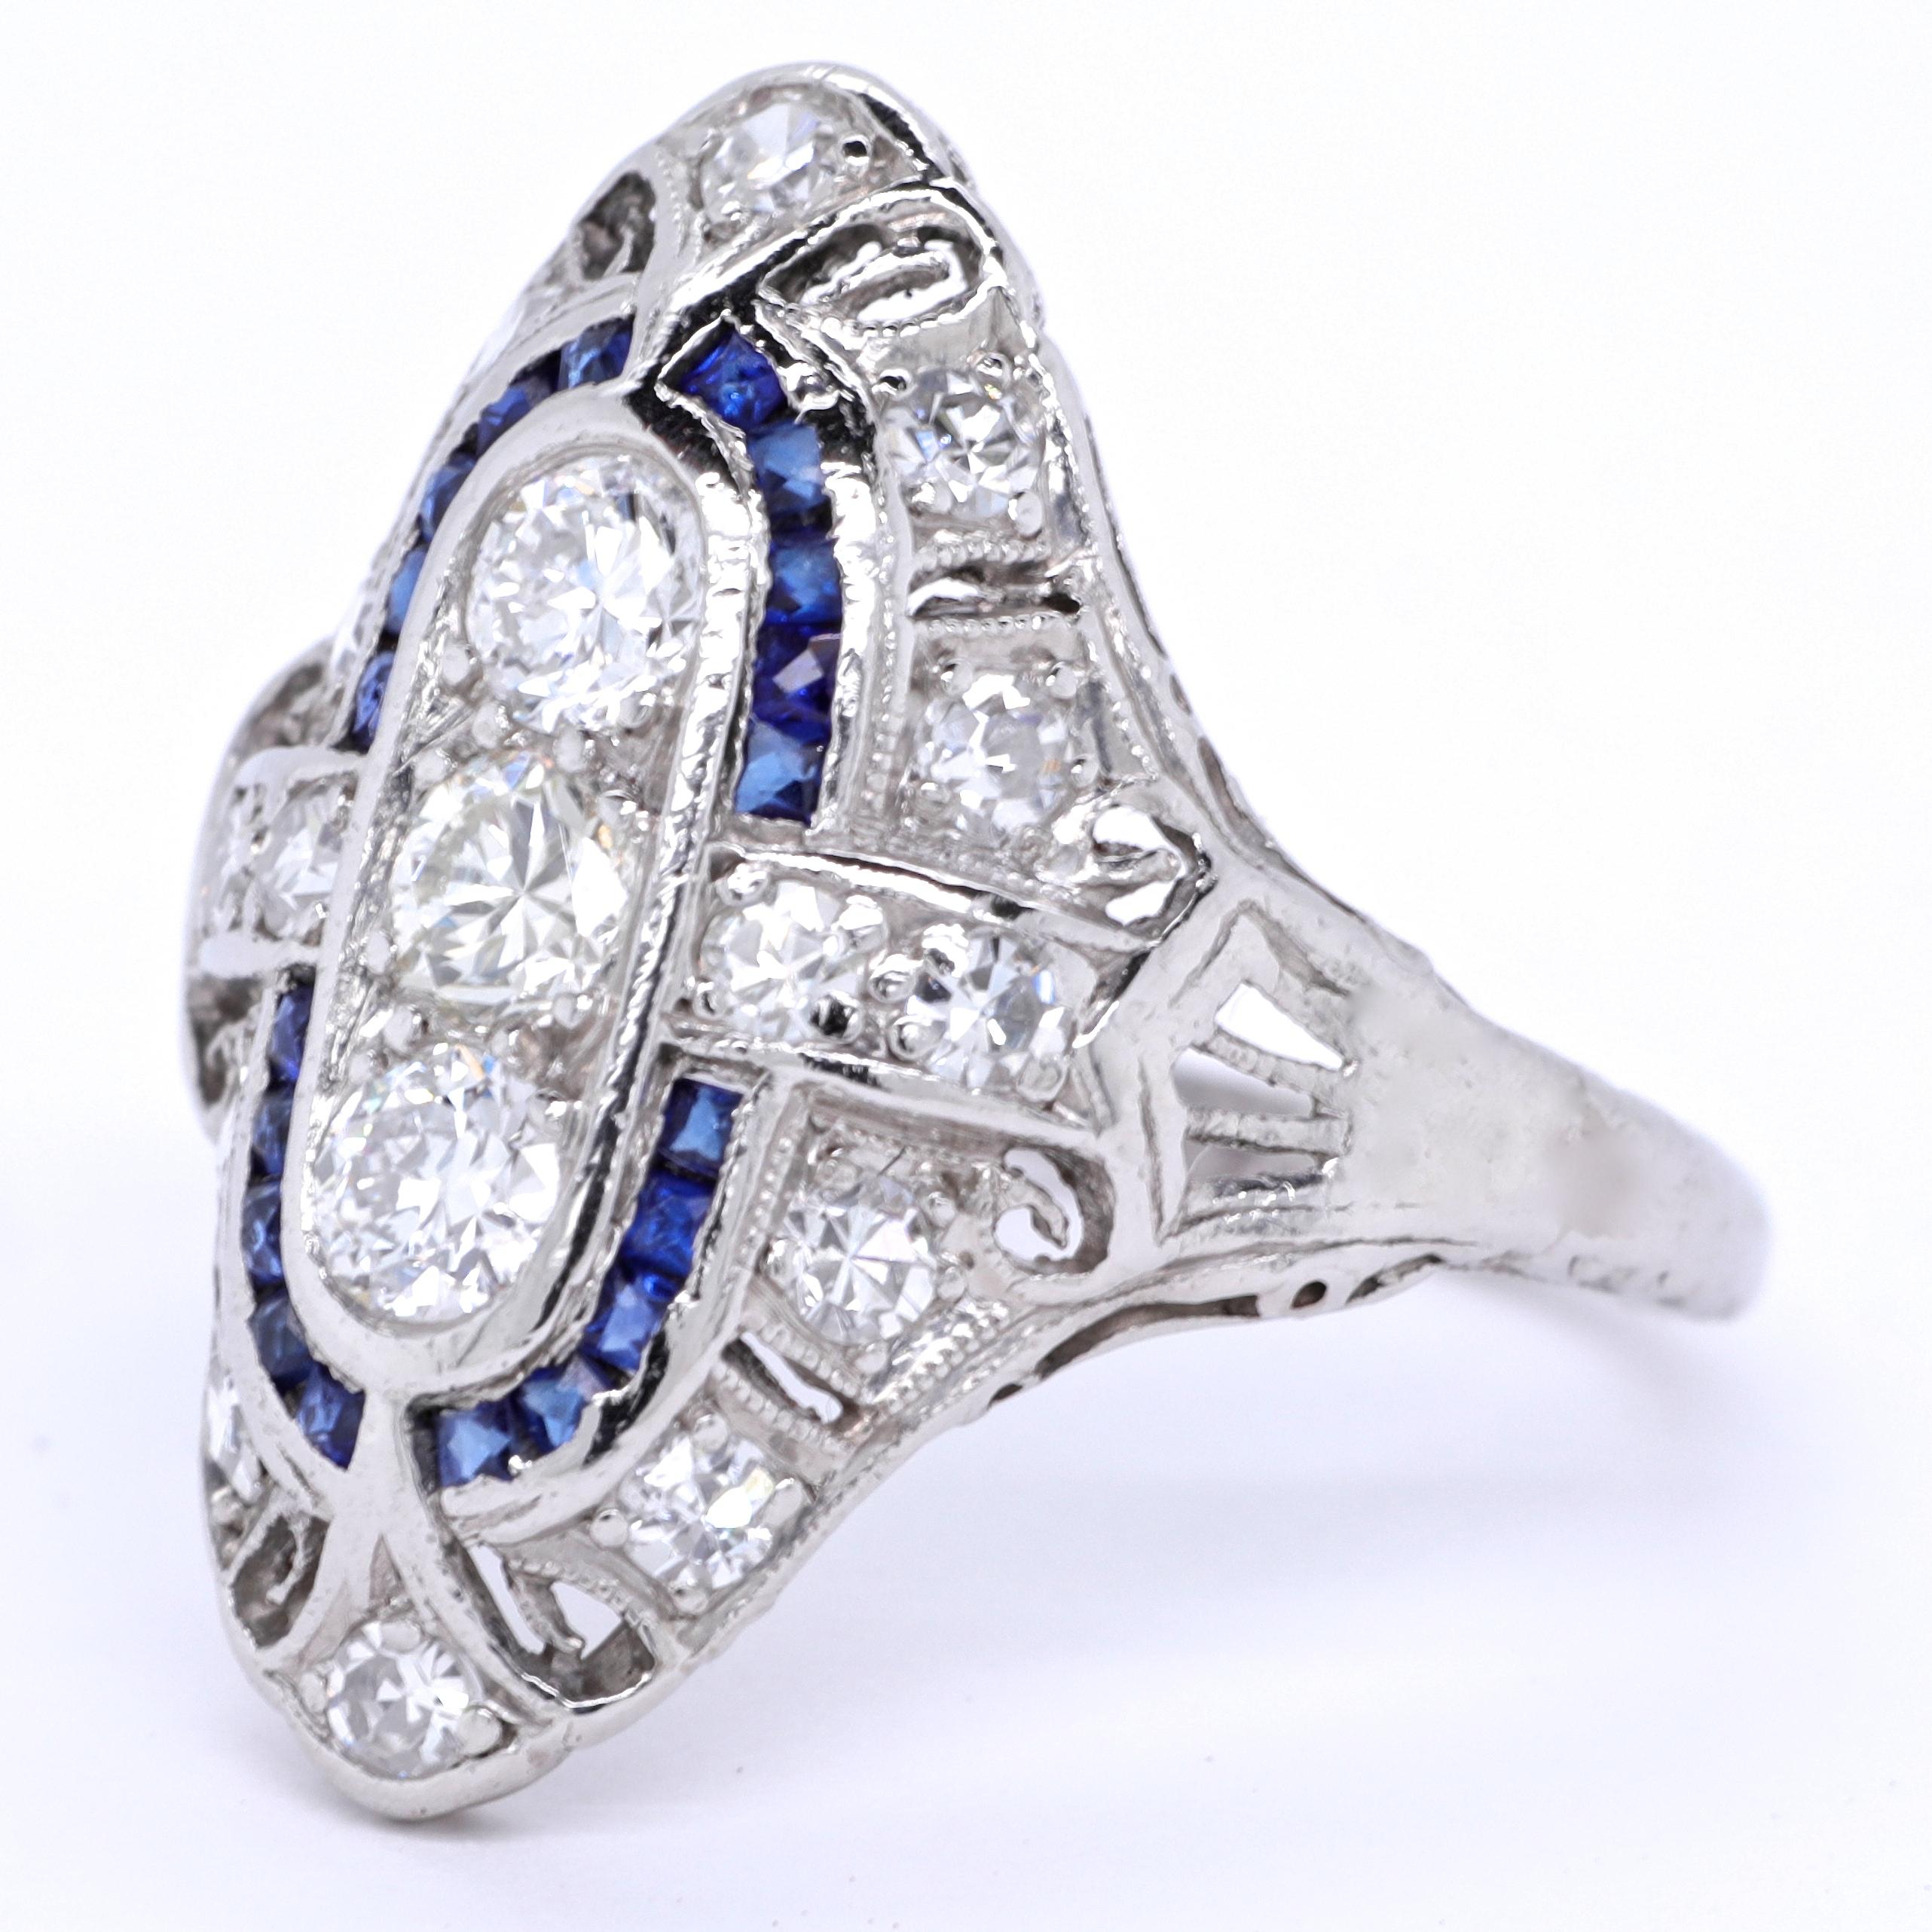 Imagine wearing a work of art on your finger. Something you can look at and enjoy everyday. This stunning Art Deco Diamond Sapphire  Navette Platinum Ring will give you pleasure for years to come. It features 3 old European cut diamonds